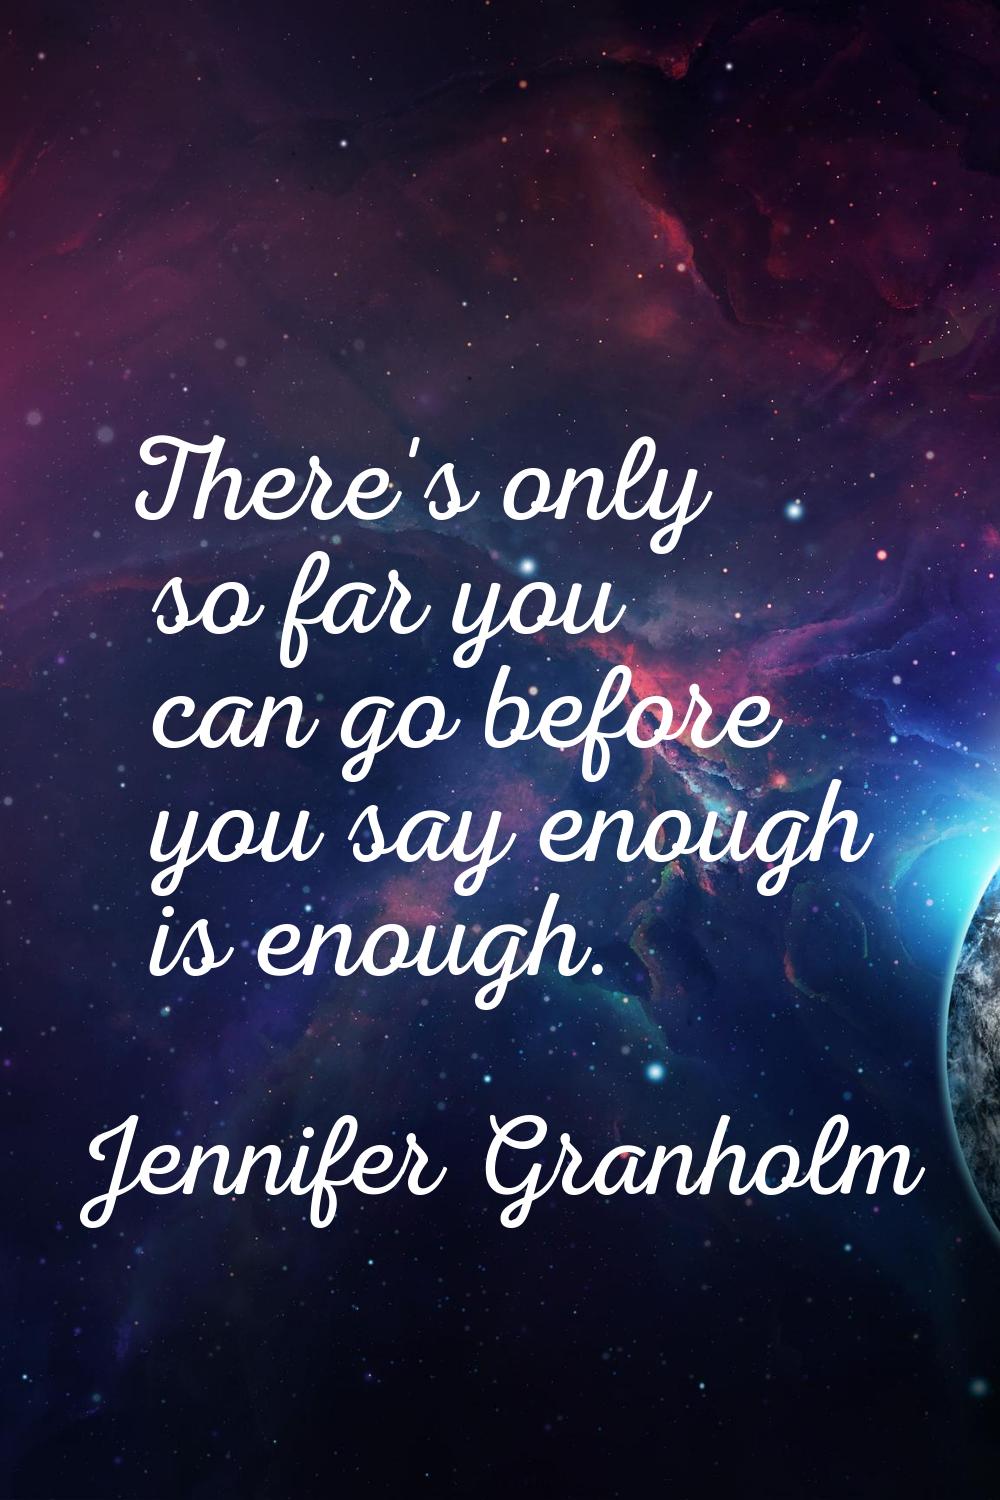 There's only so far you can go before you say enough is enough.